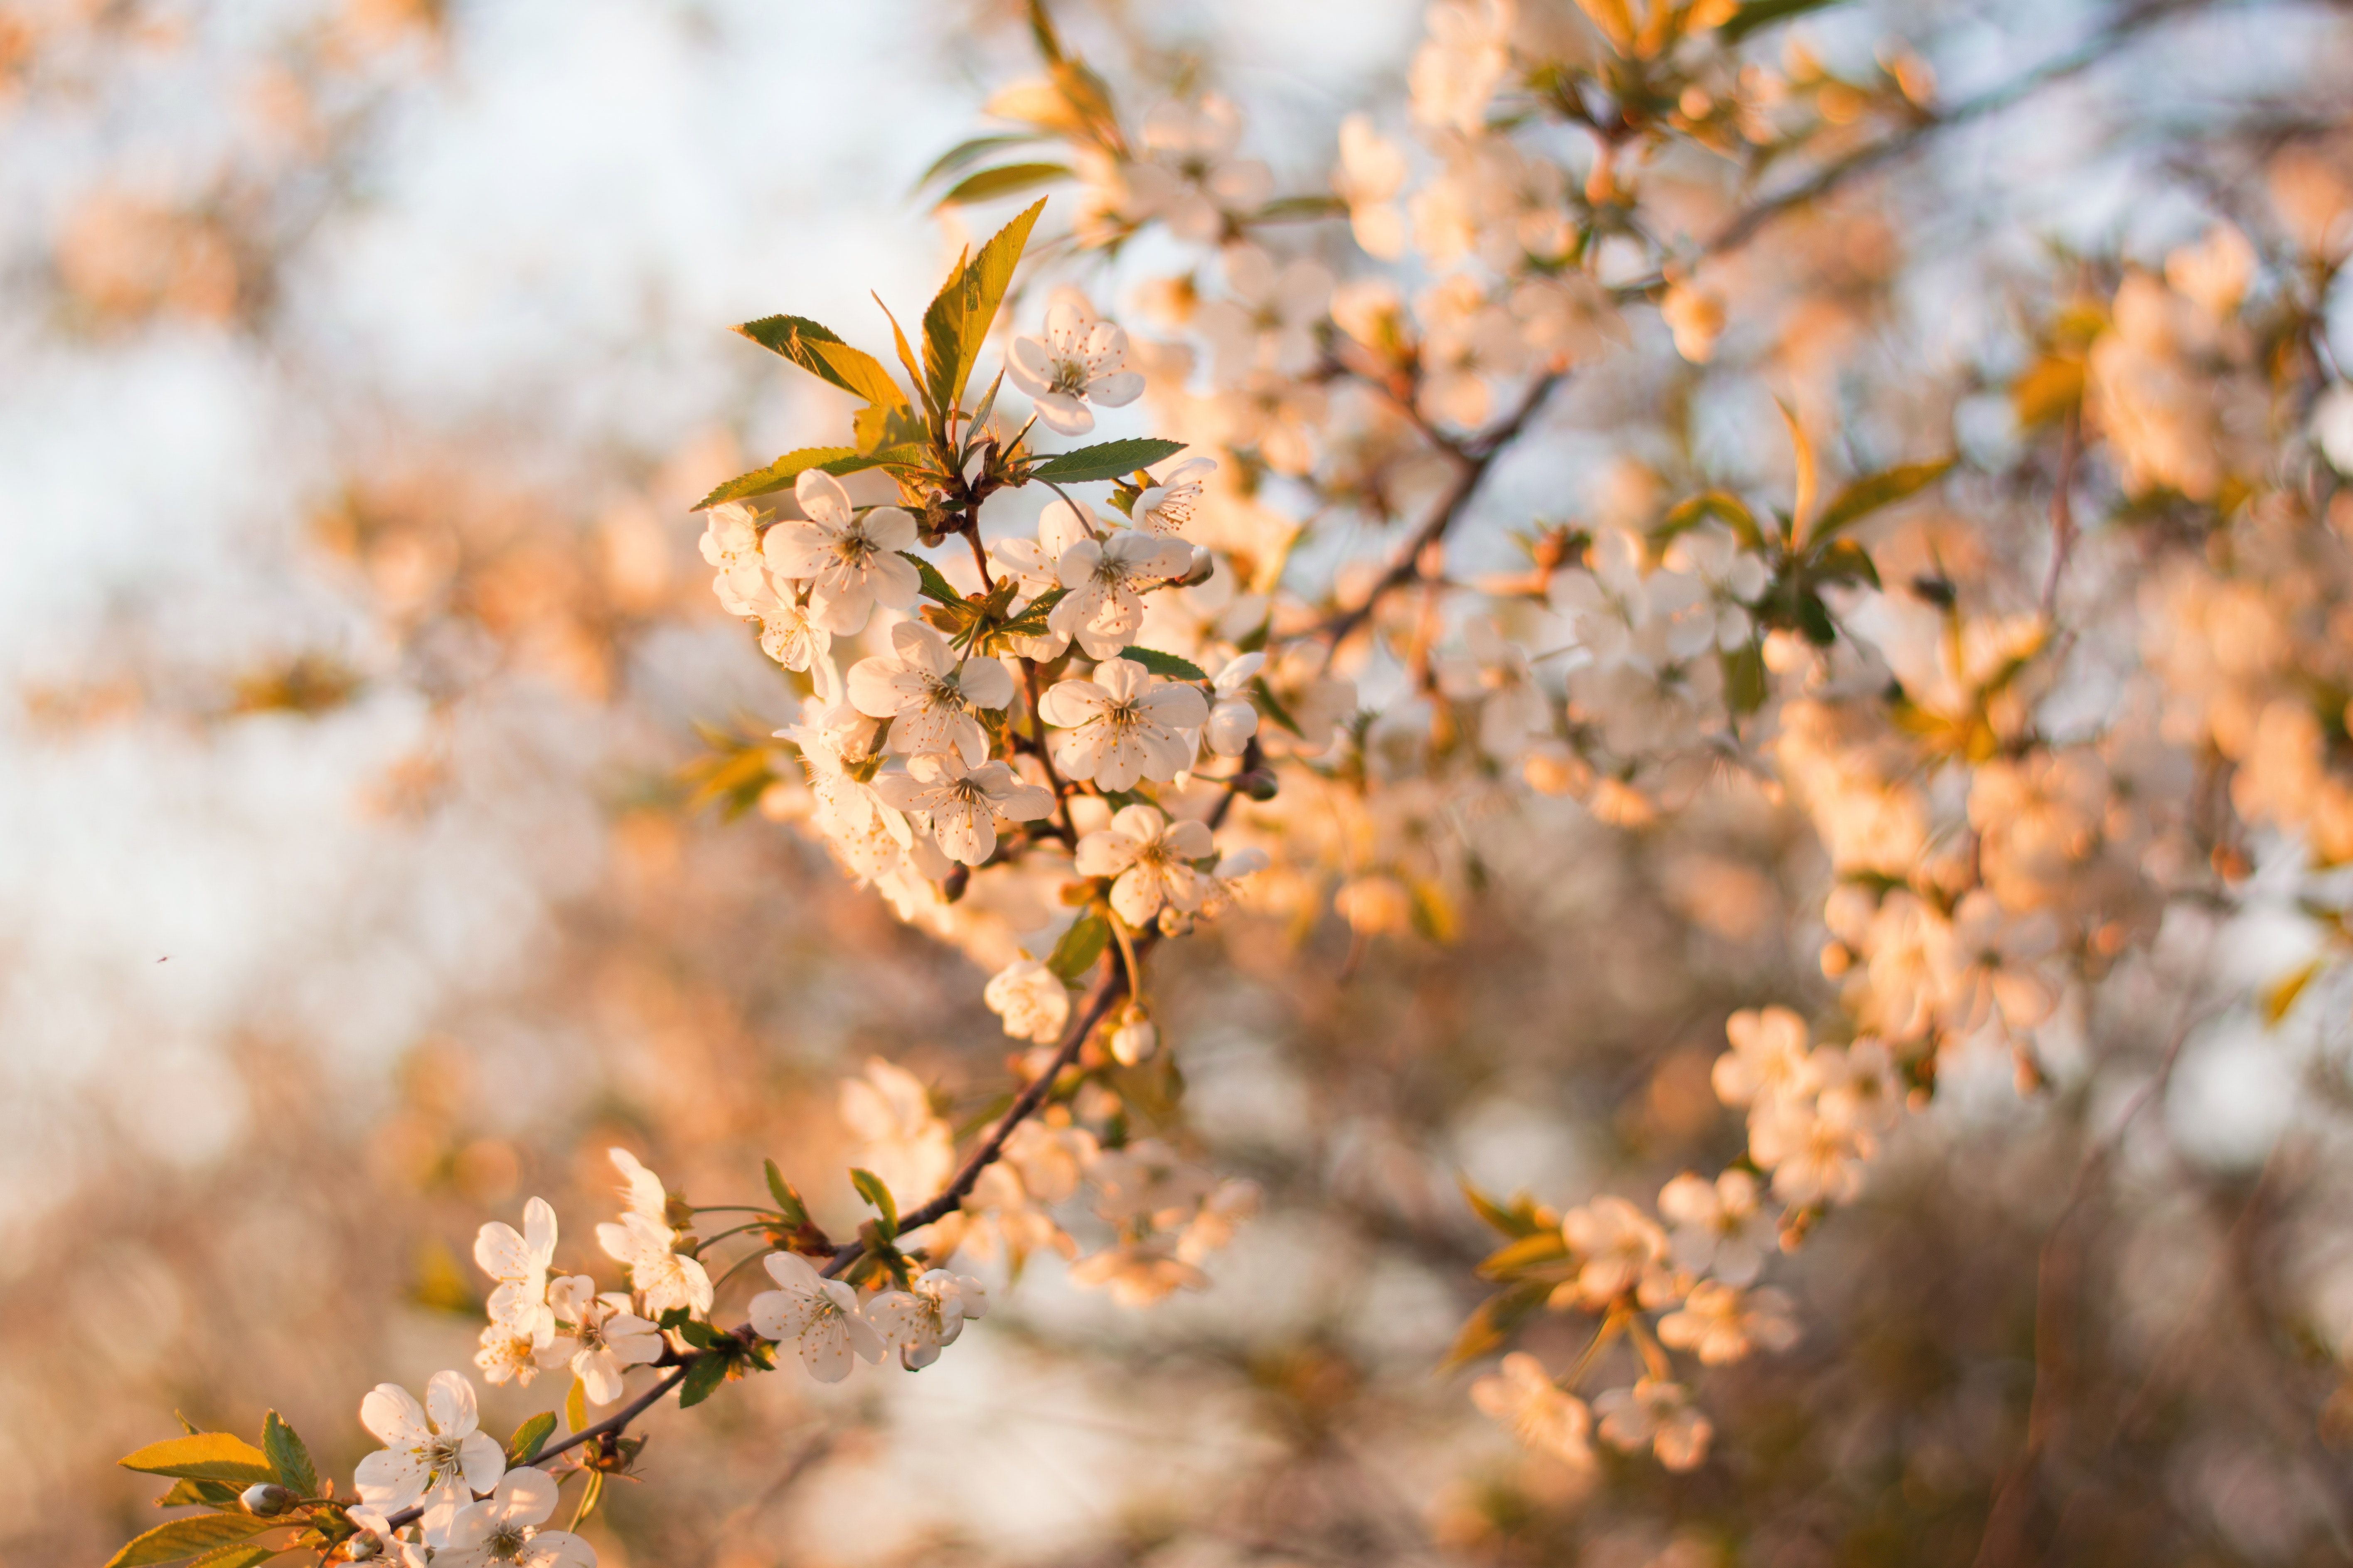 Selective focus photography of white cherry blossom flowers